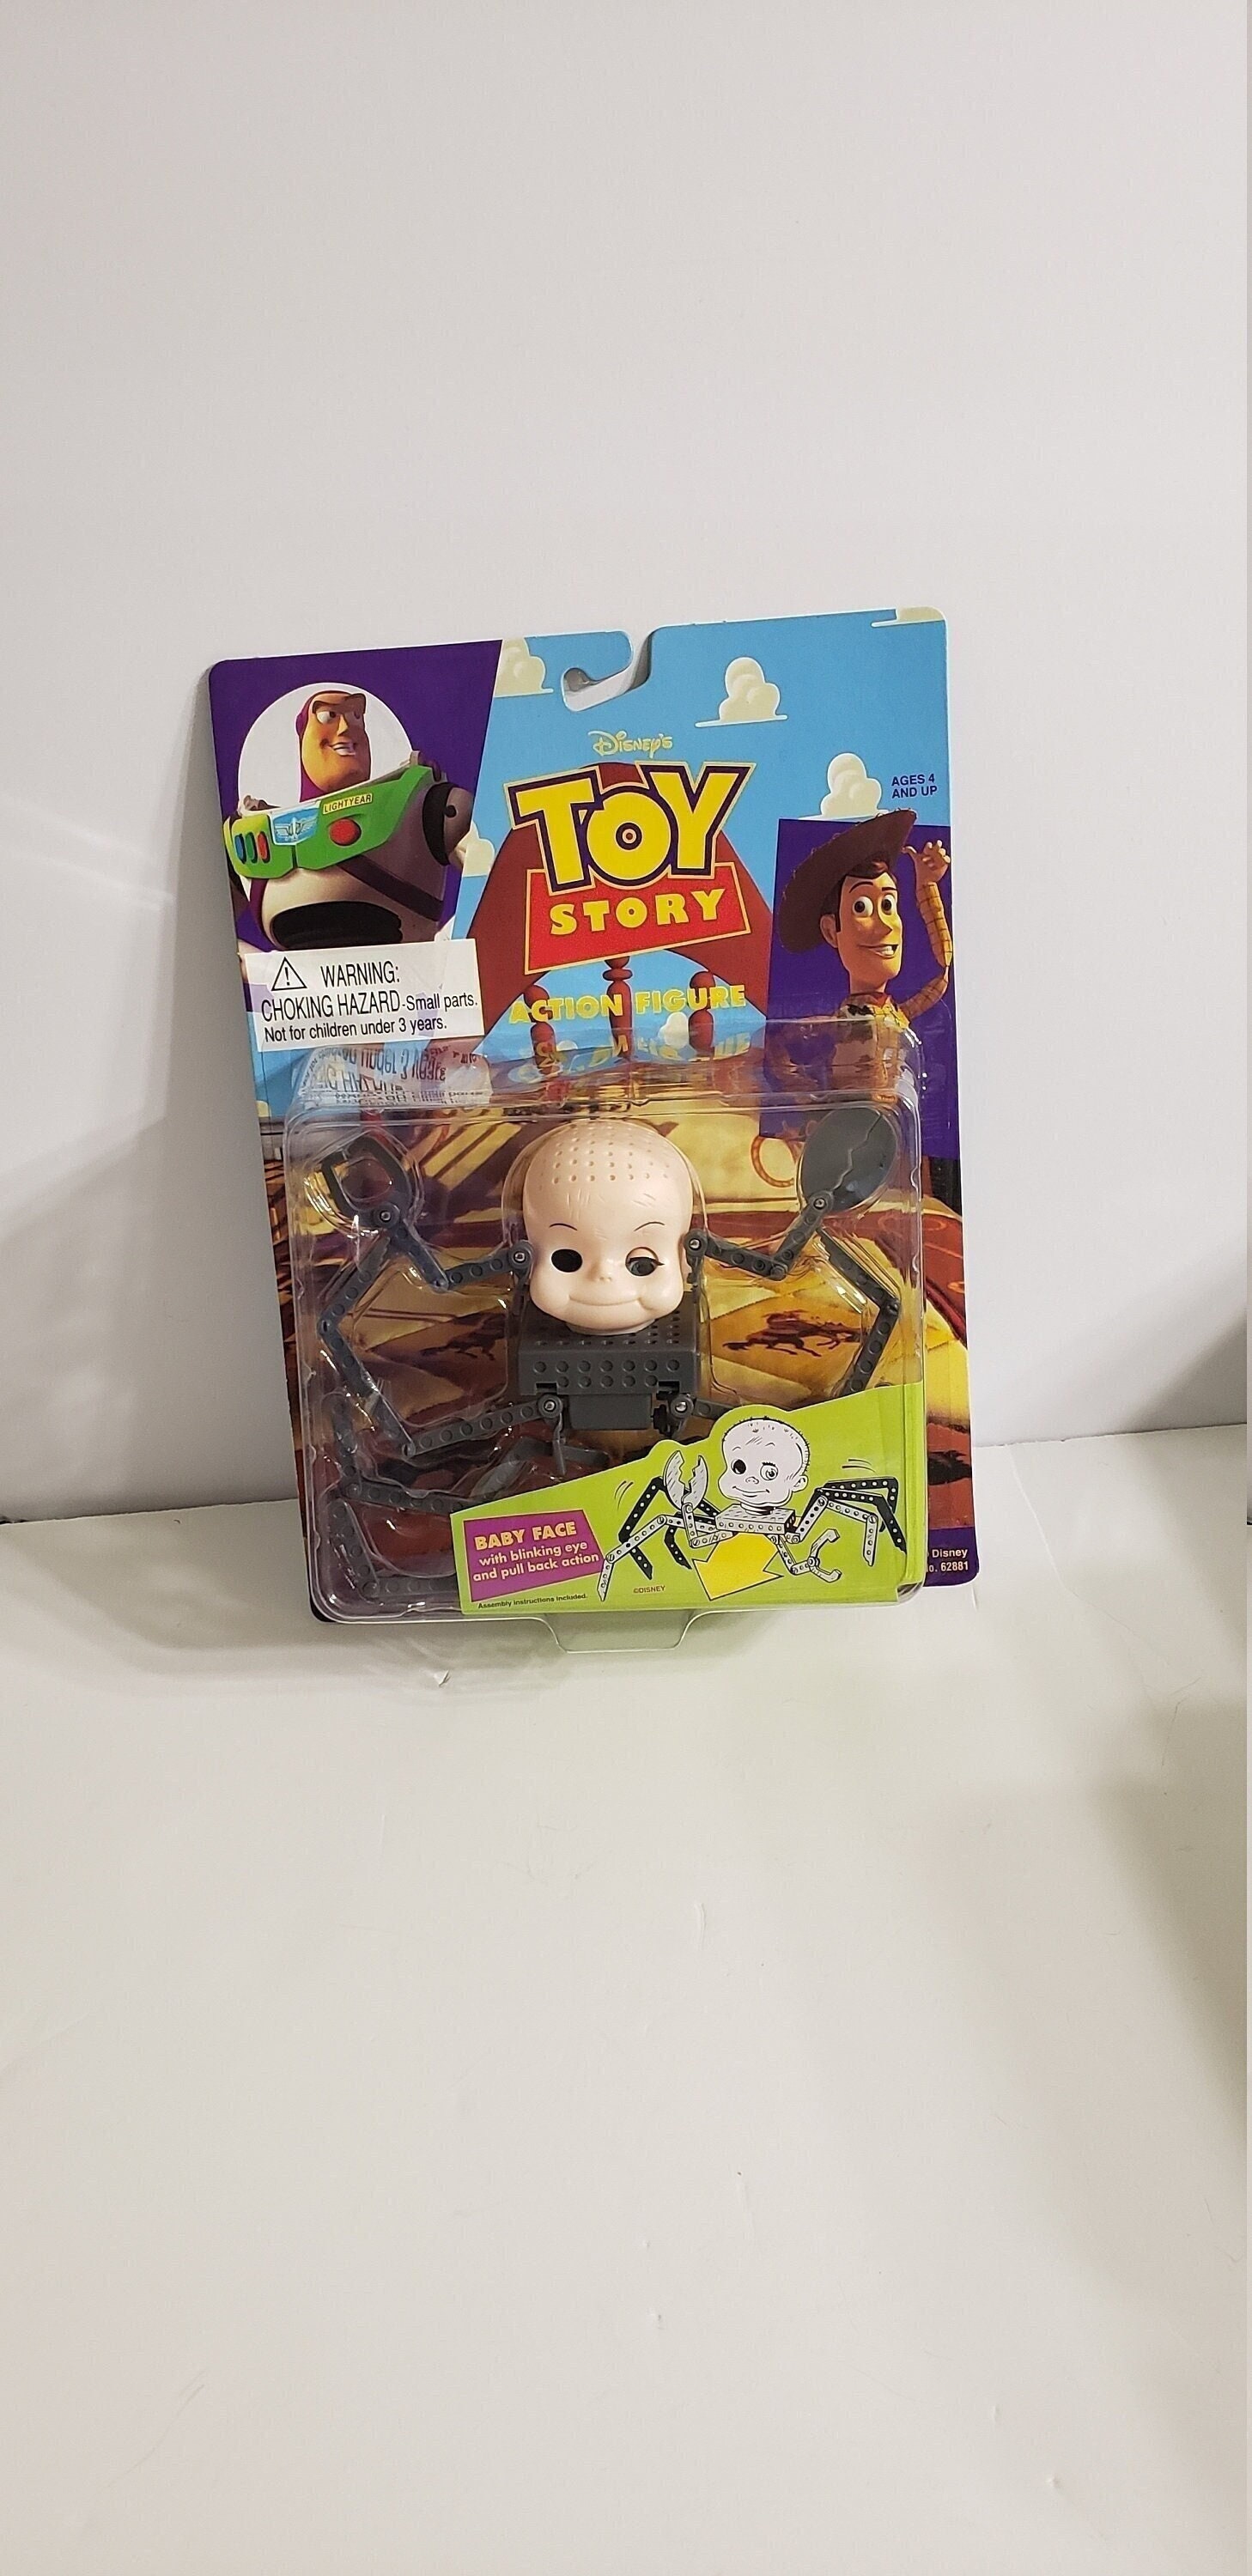 1995 Baby Face toy Story Action Figure MINT on - Etsy